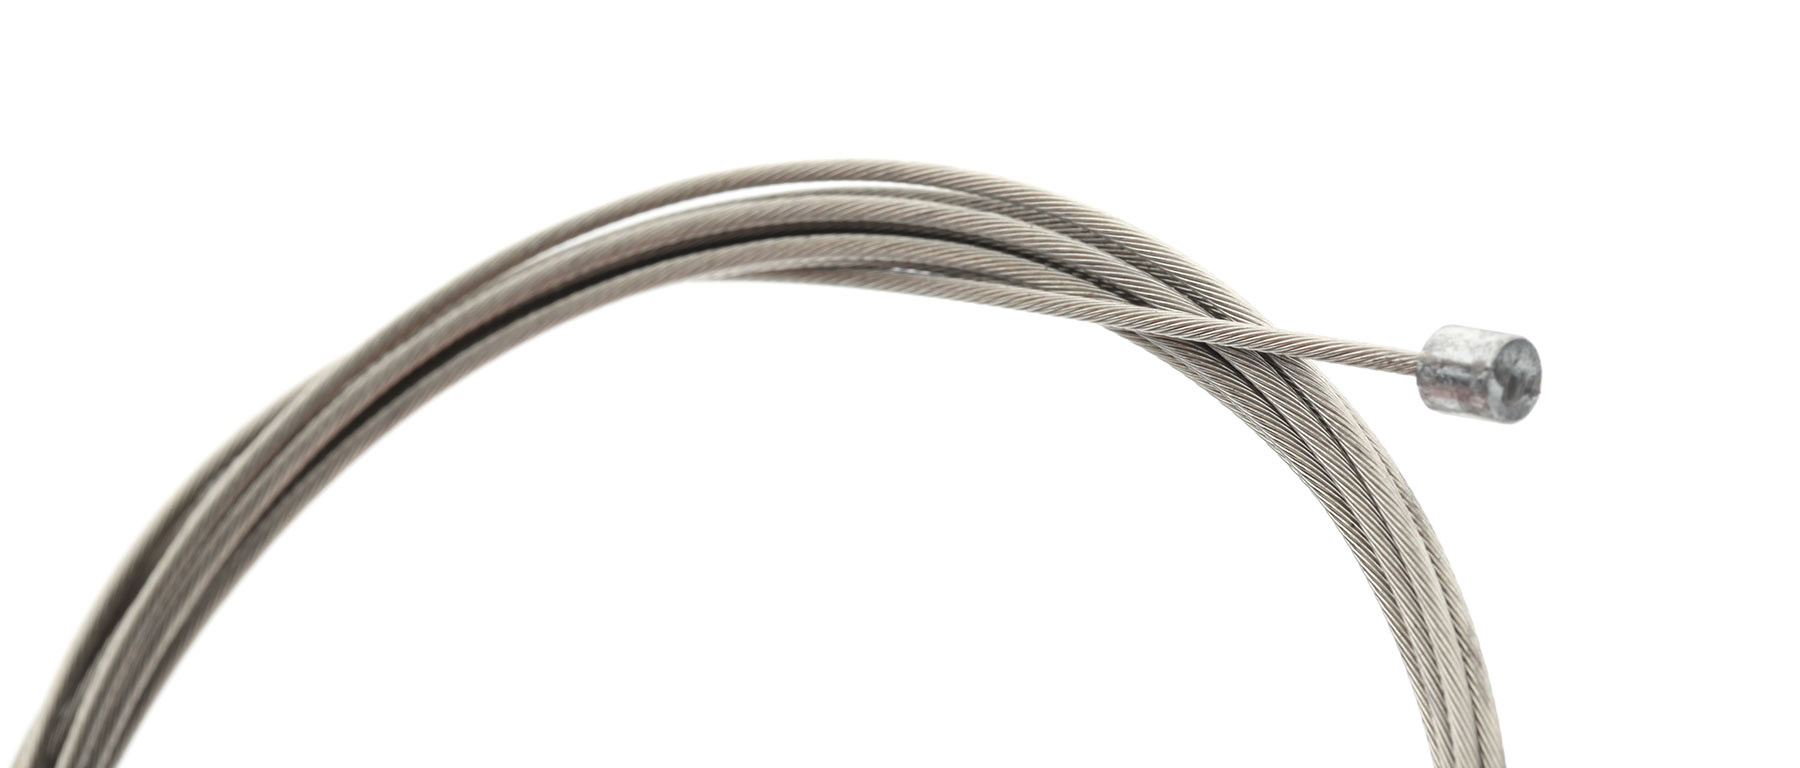 Shimano Steel Shift Cable